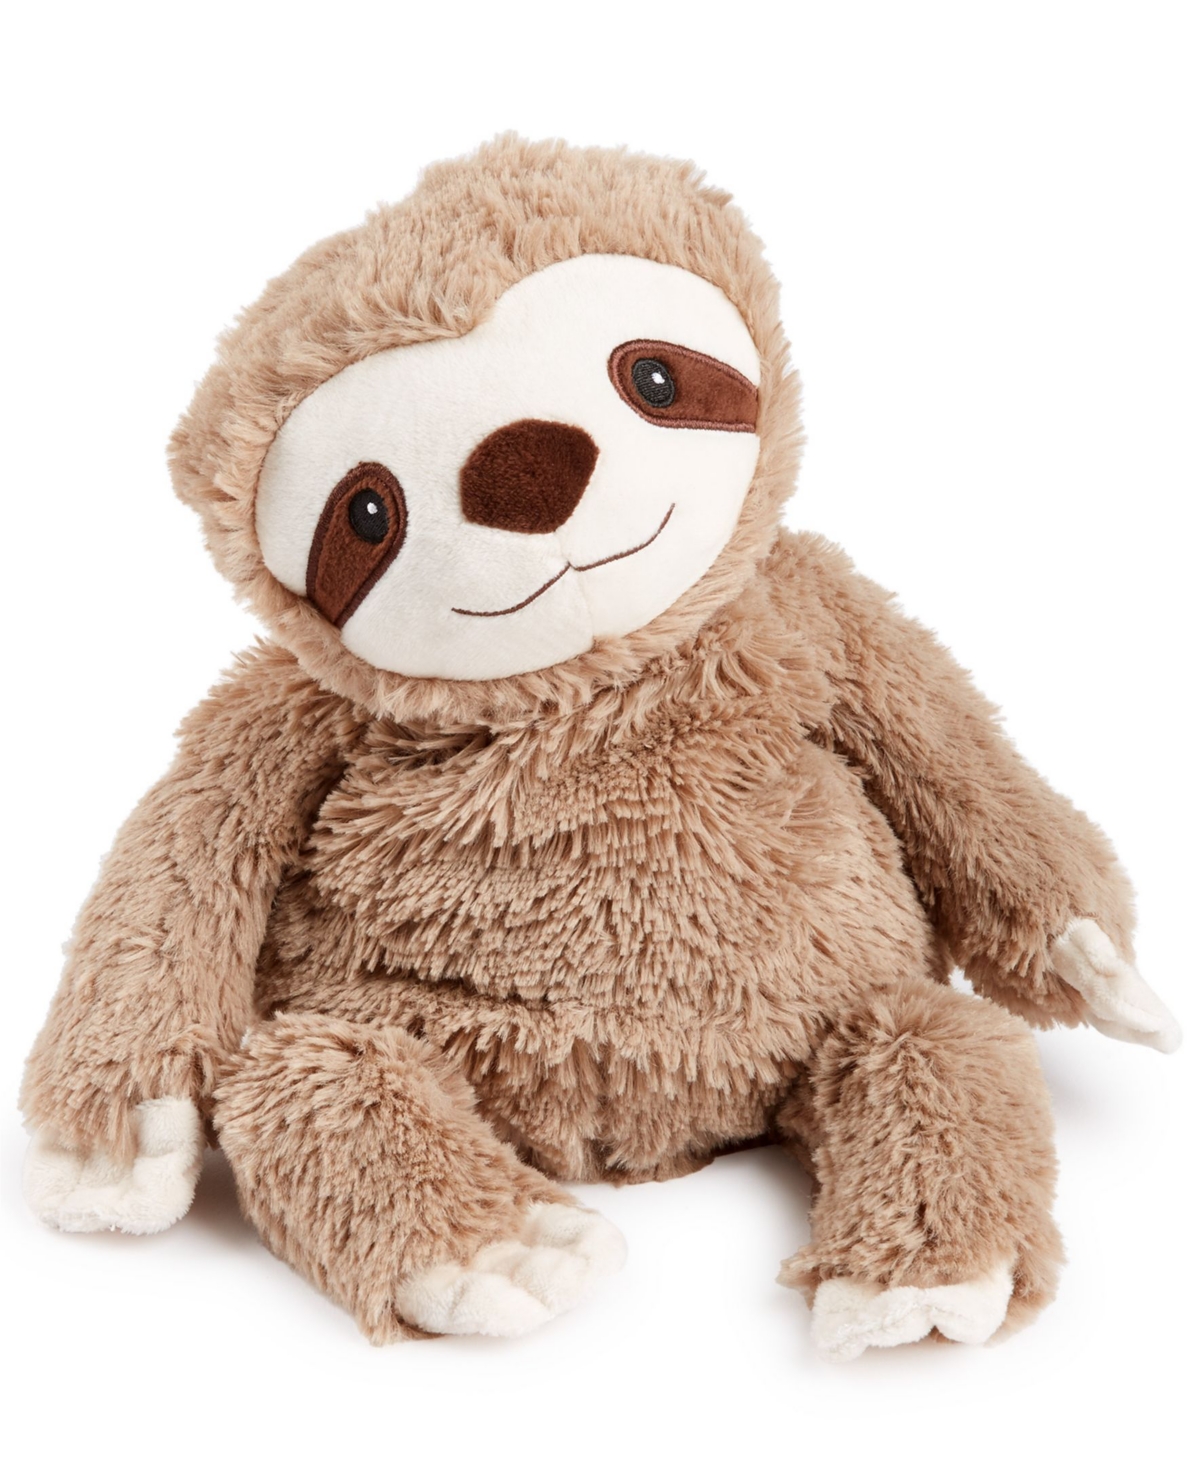 Warmies Microwavable Plush Sloth In Brown